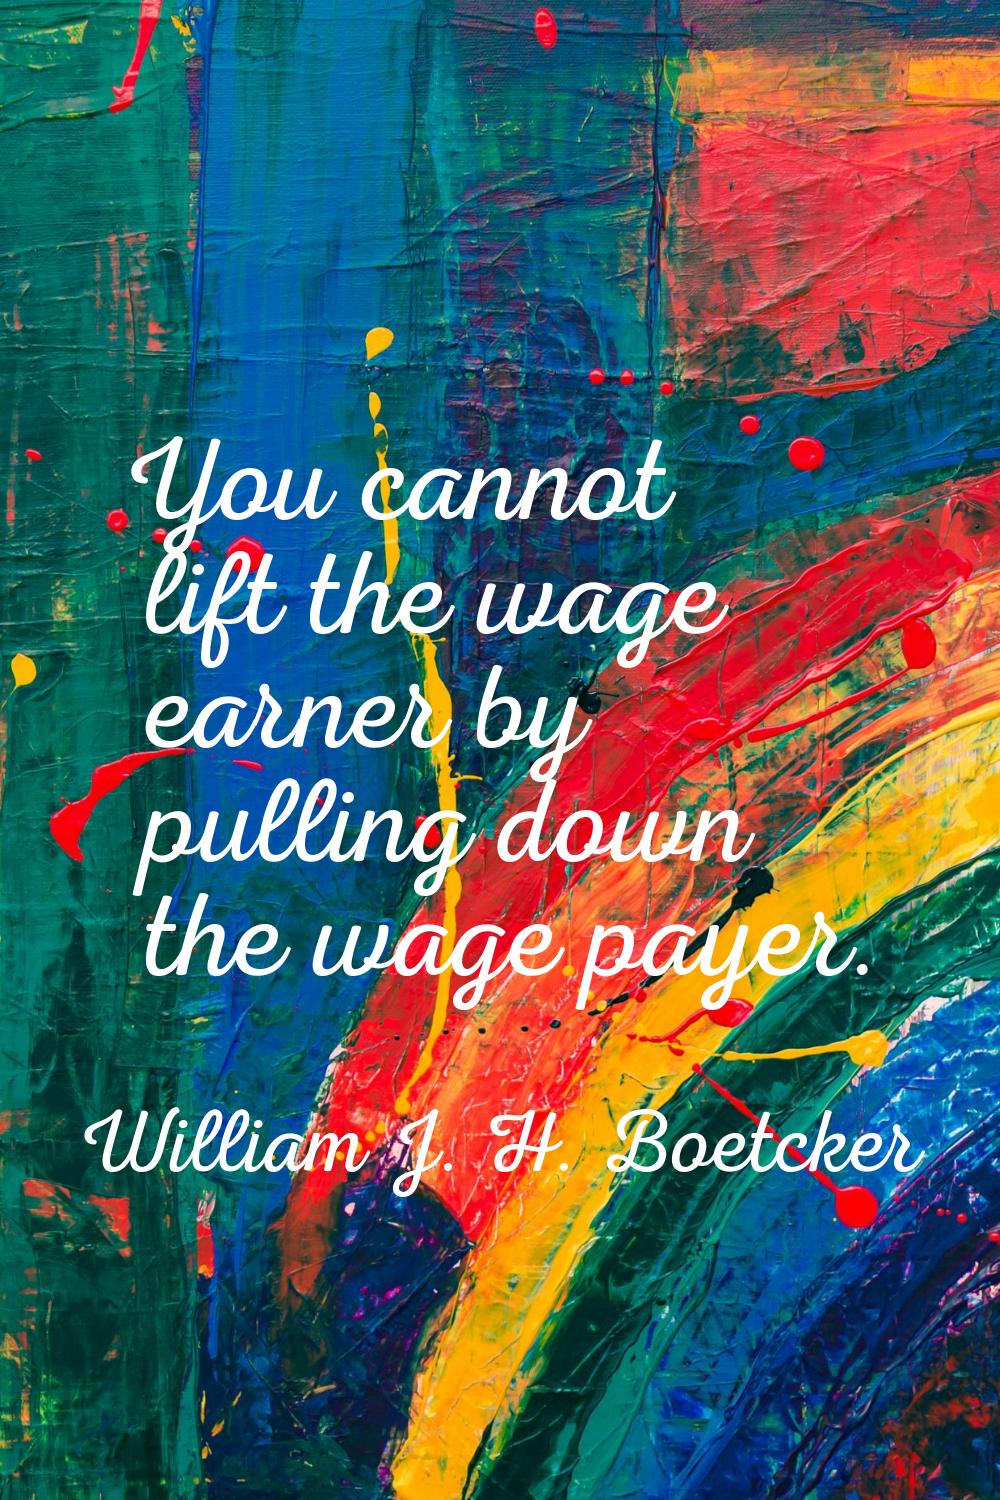 You cannot lift the wage earner by pulling down the wage payer.